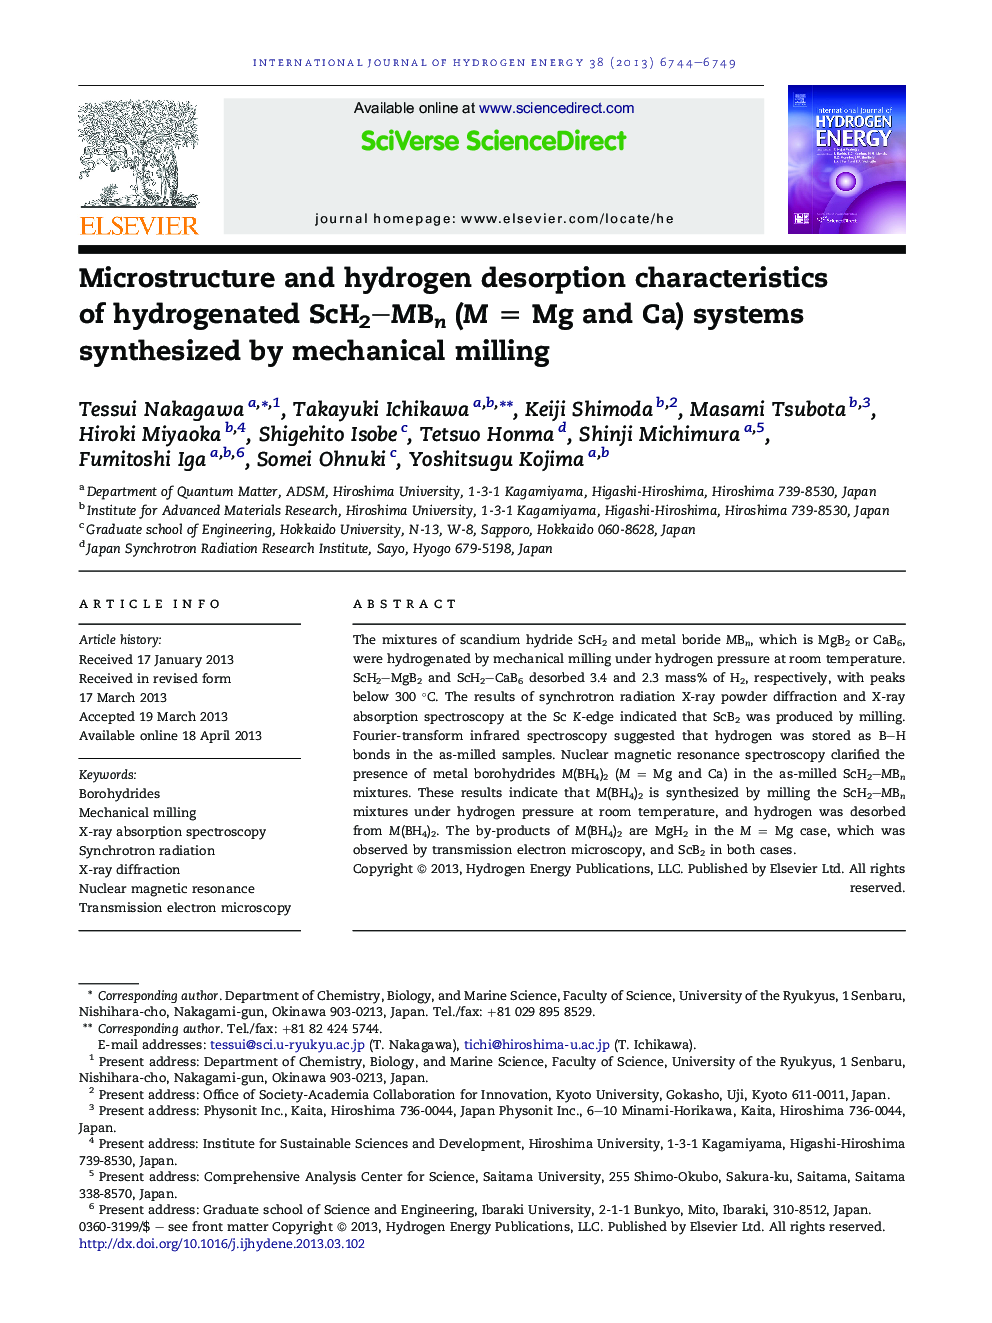 Microstructure and hydrogen desorption characteristics of hydrogenated ScH2–MBn (M = Mg and Ca) systems synthesized by mechanical milling